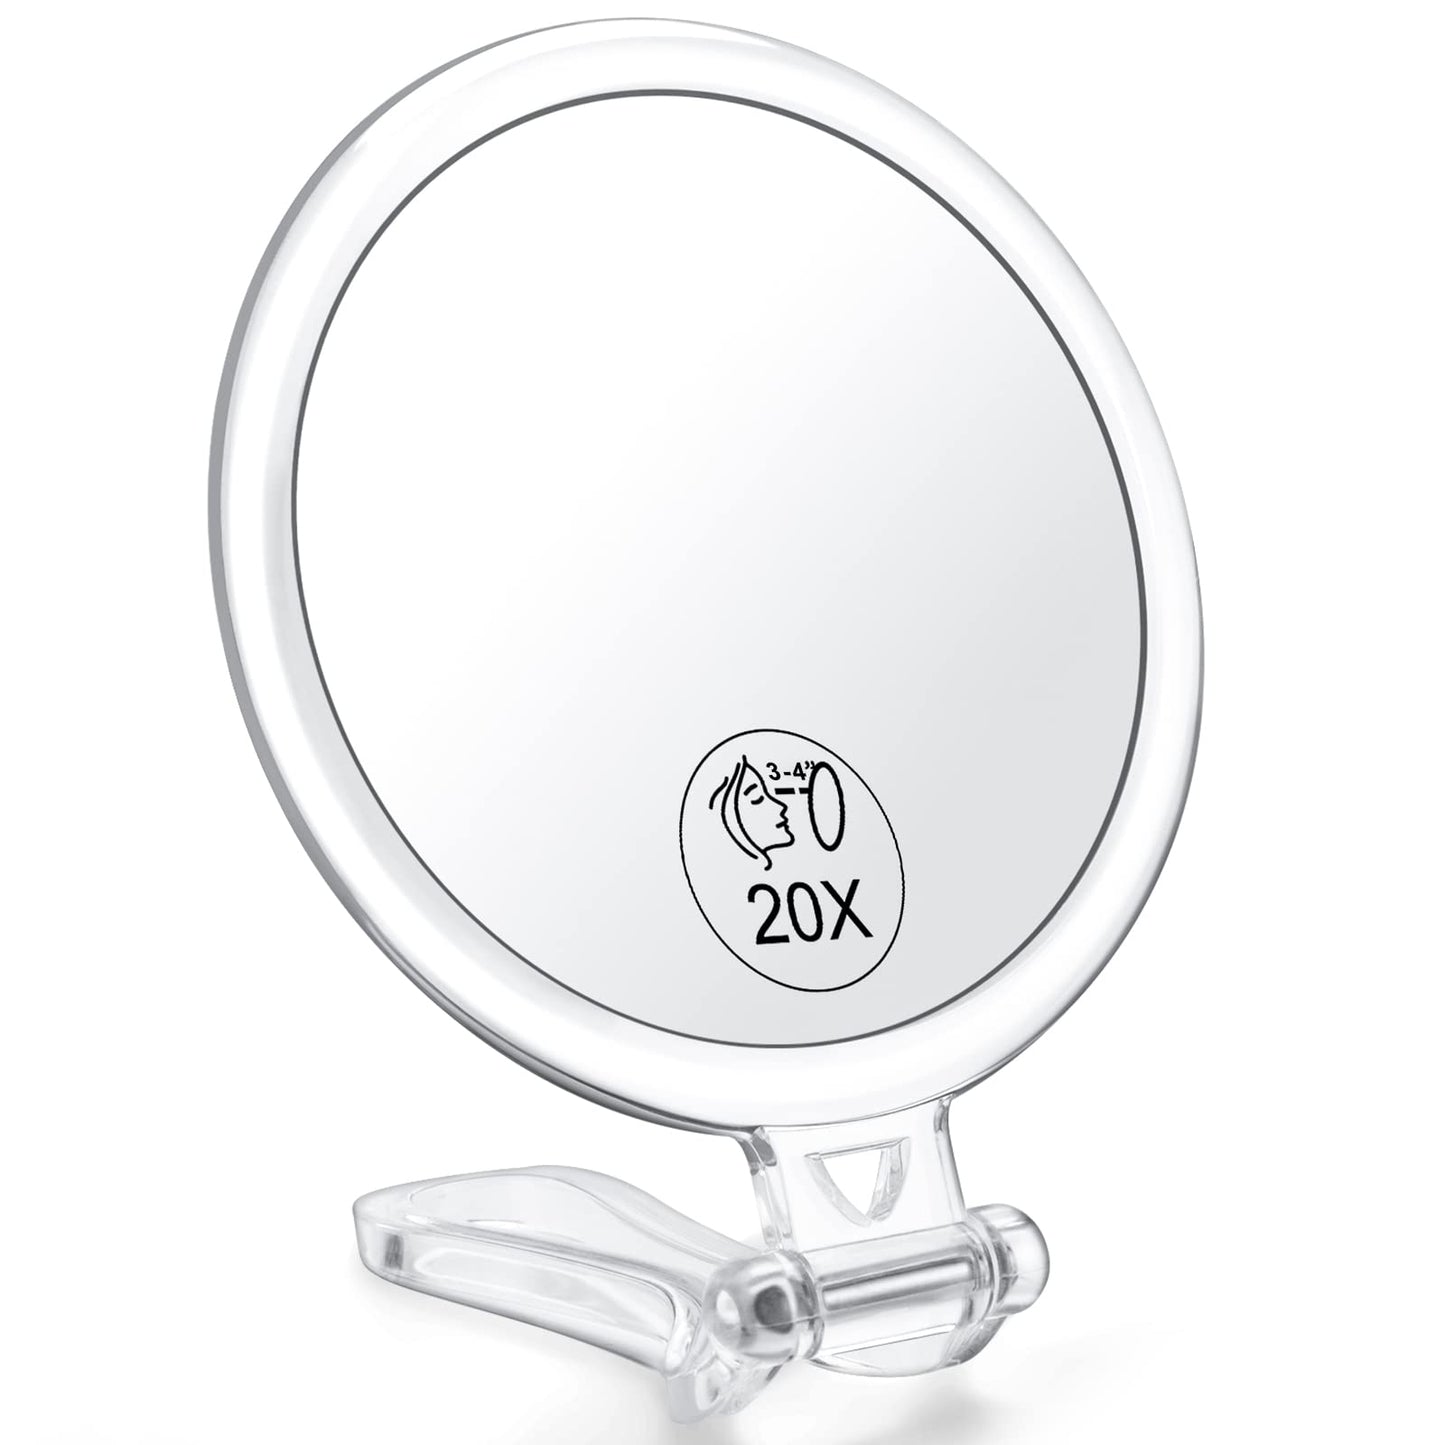 AMISCE 20x Magnifying Mirror, Travel Handheld Mirror - 2-Sided with 1X 20X Magnification Adjustable Handle, Portable, Small, Girl Women Mother's Gift